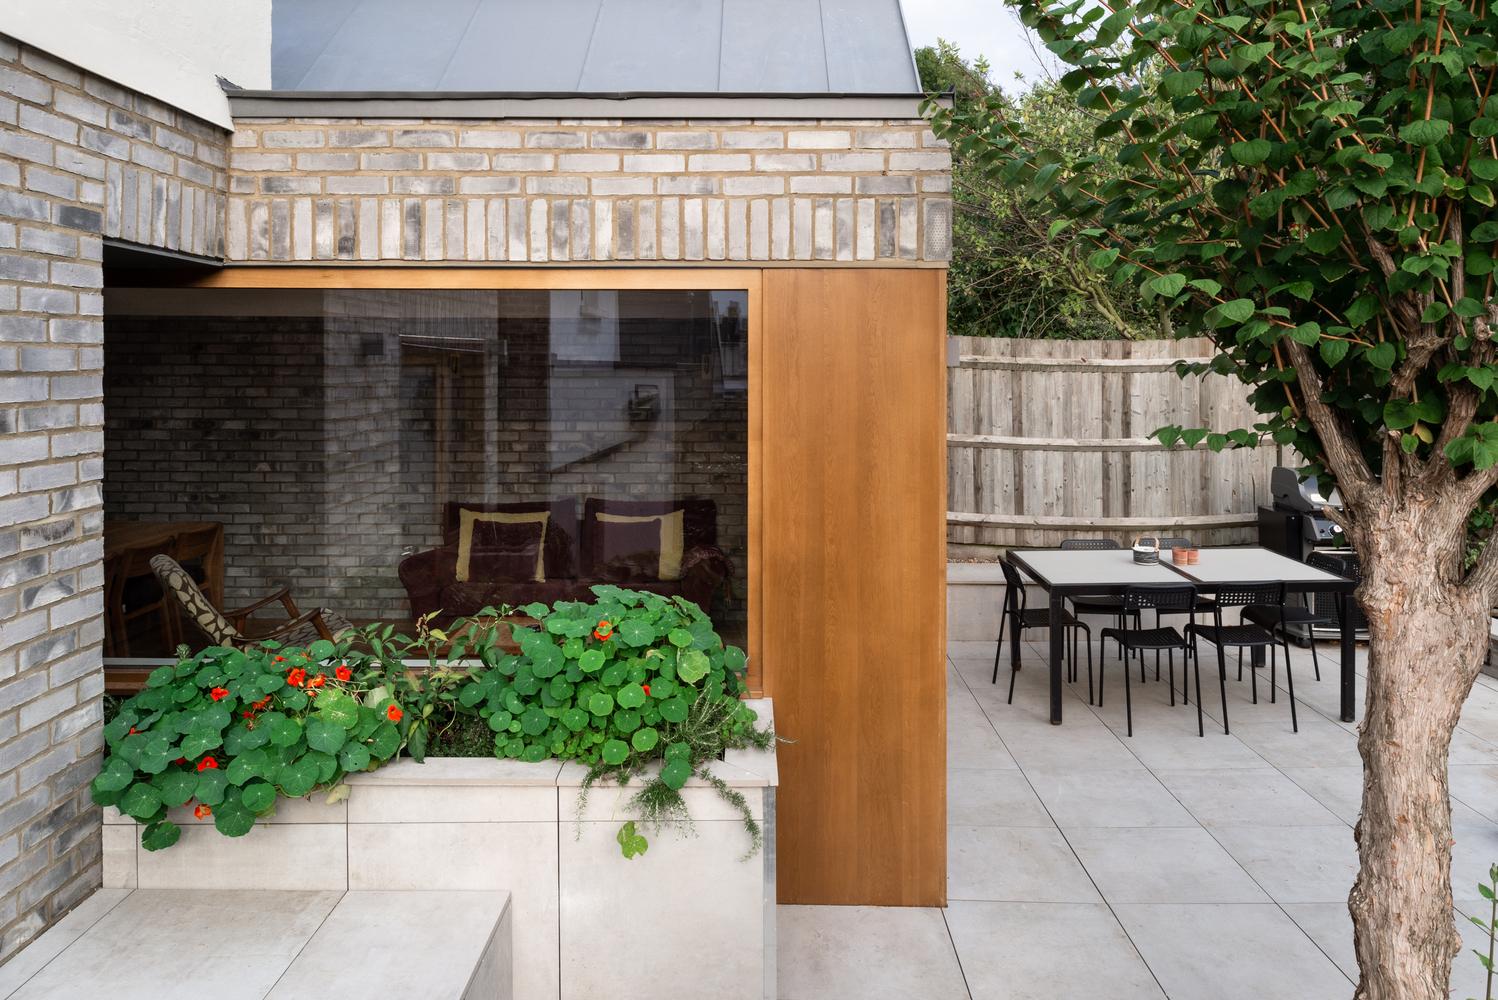 A South London Lair that is Revitalised by Greenery